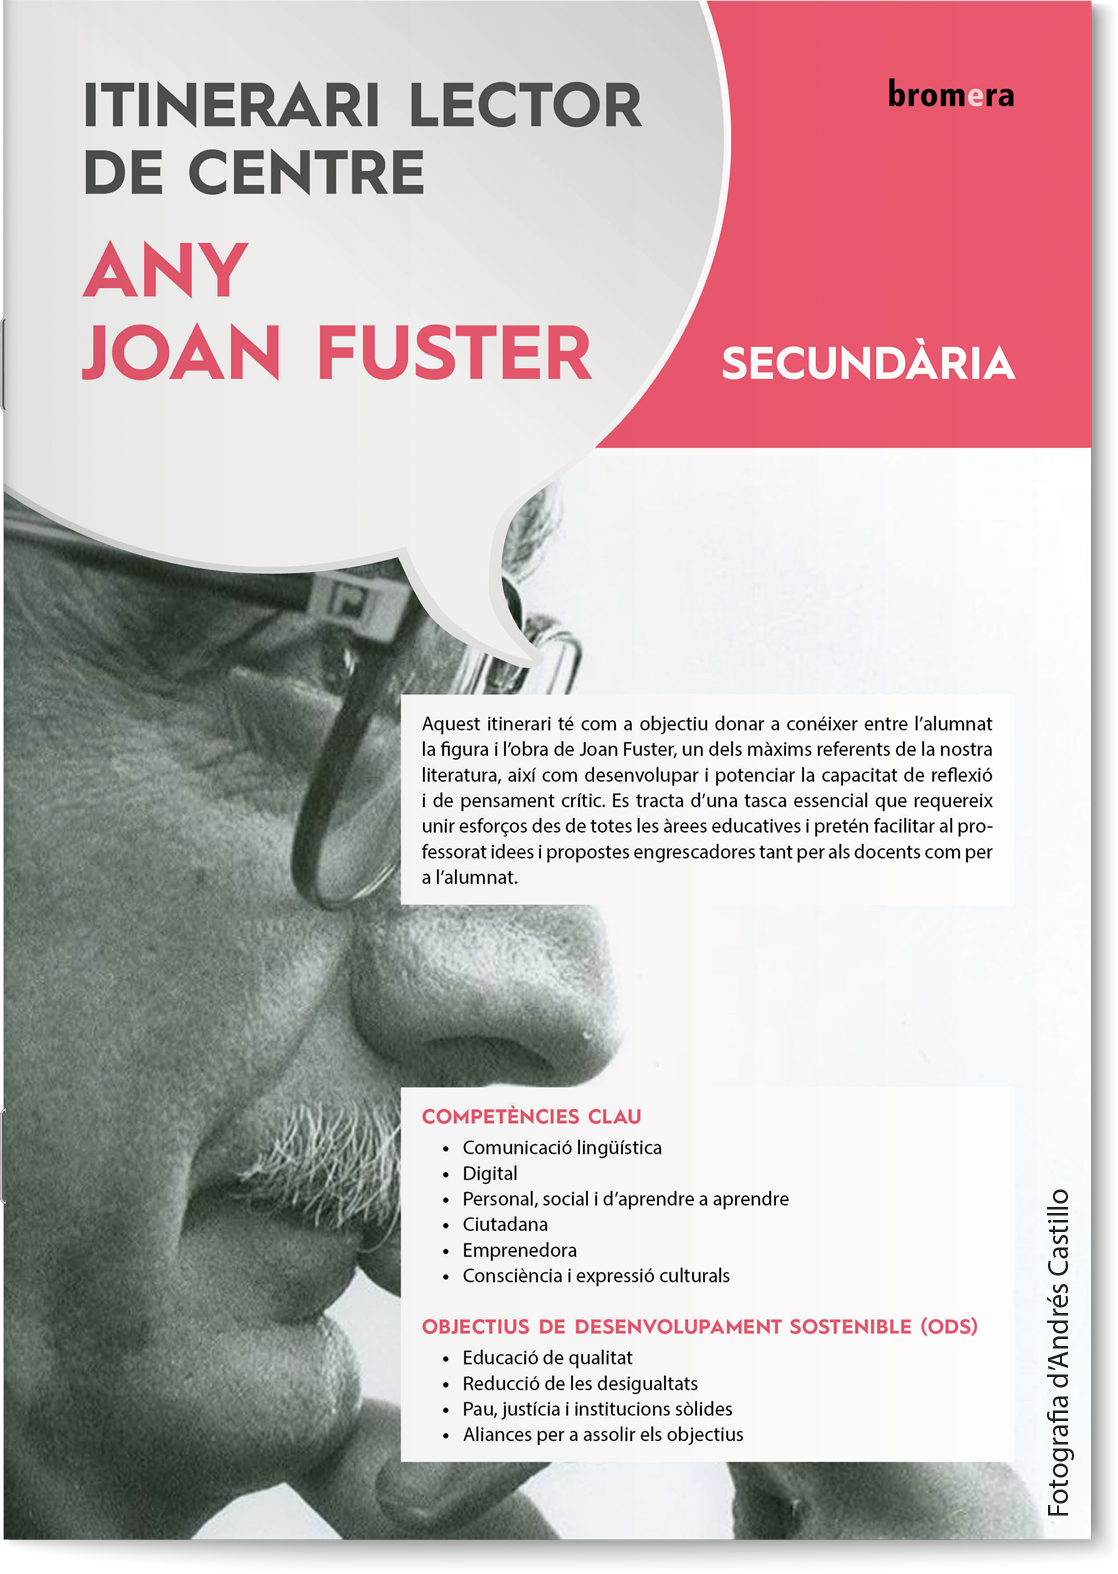 <p><strong>Any Joan Fuster</strong></p>